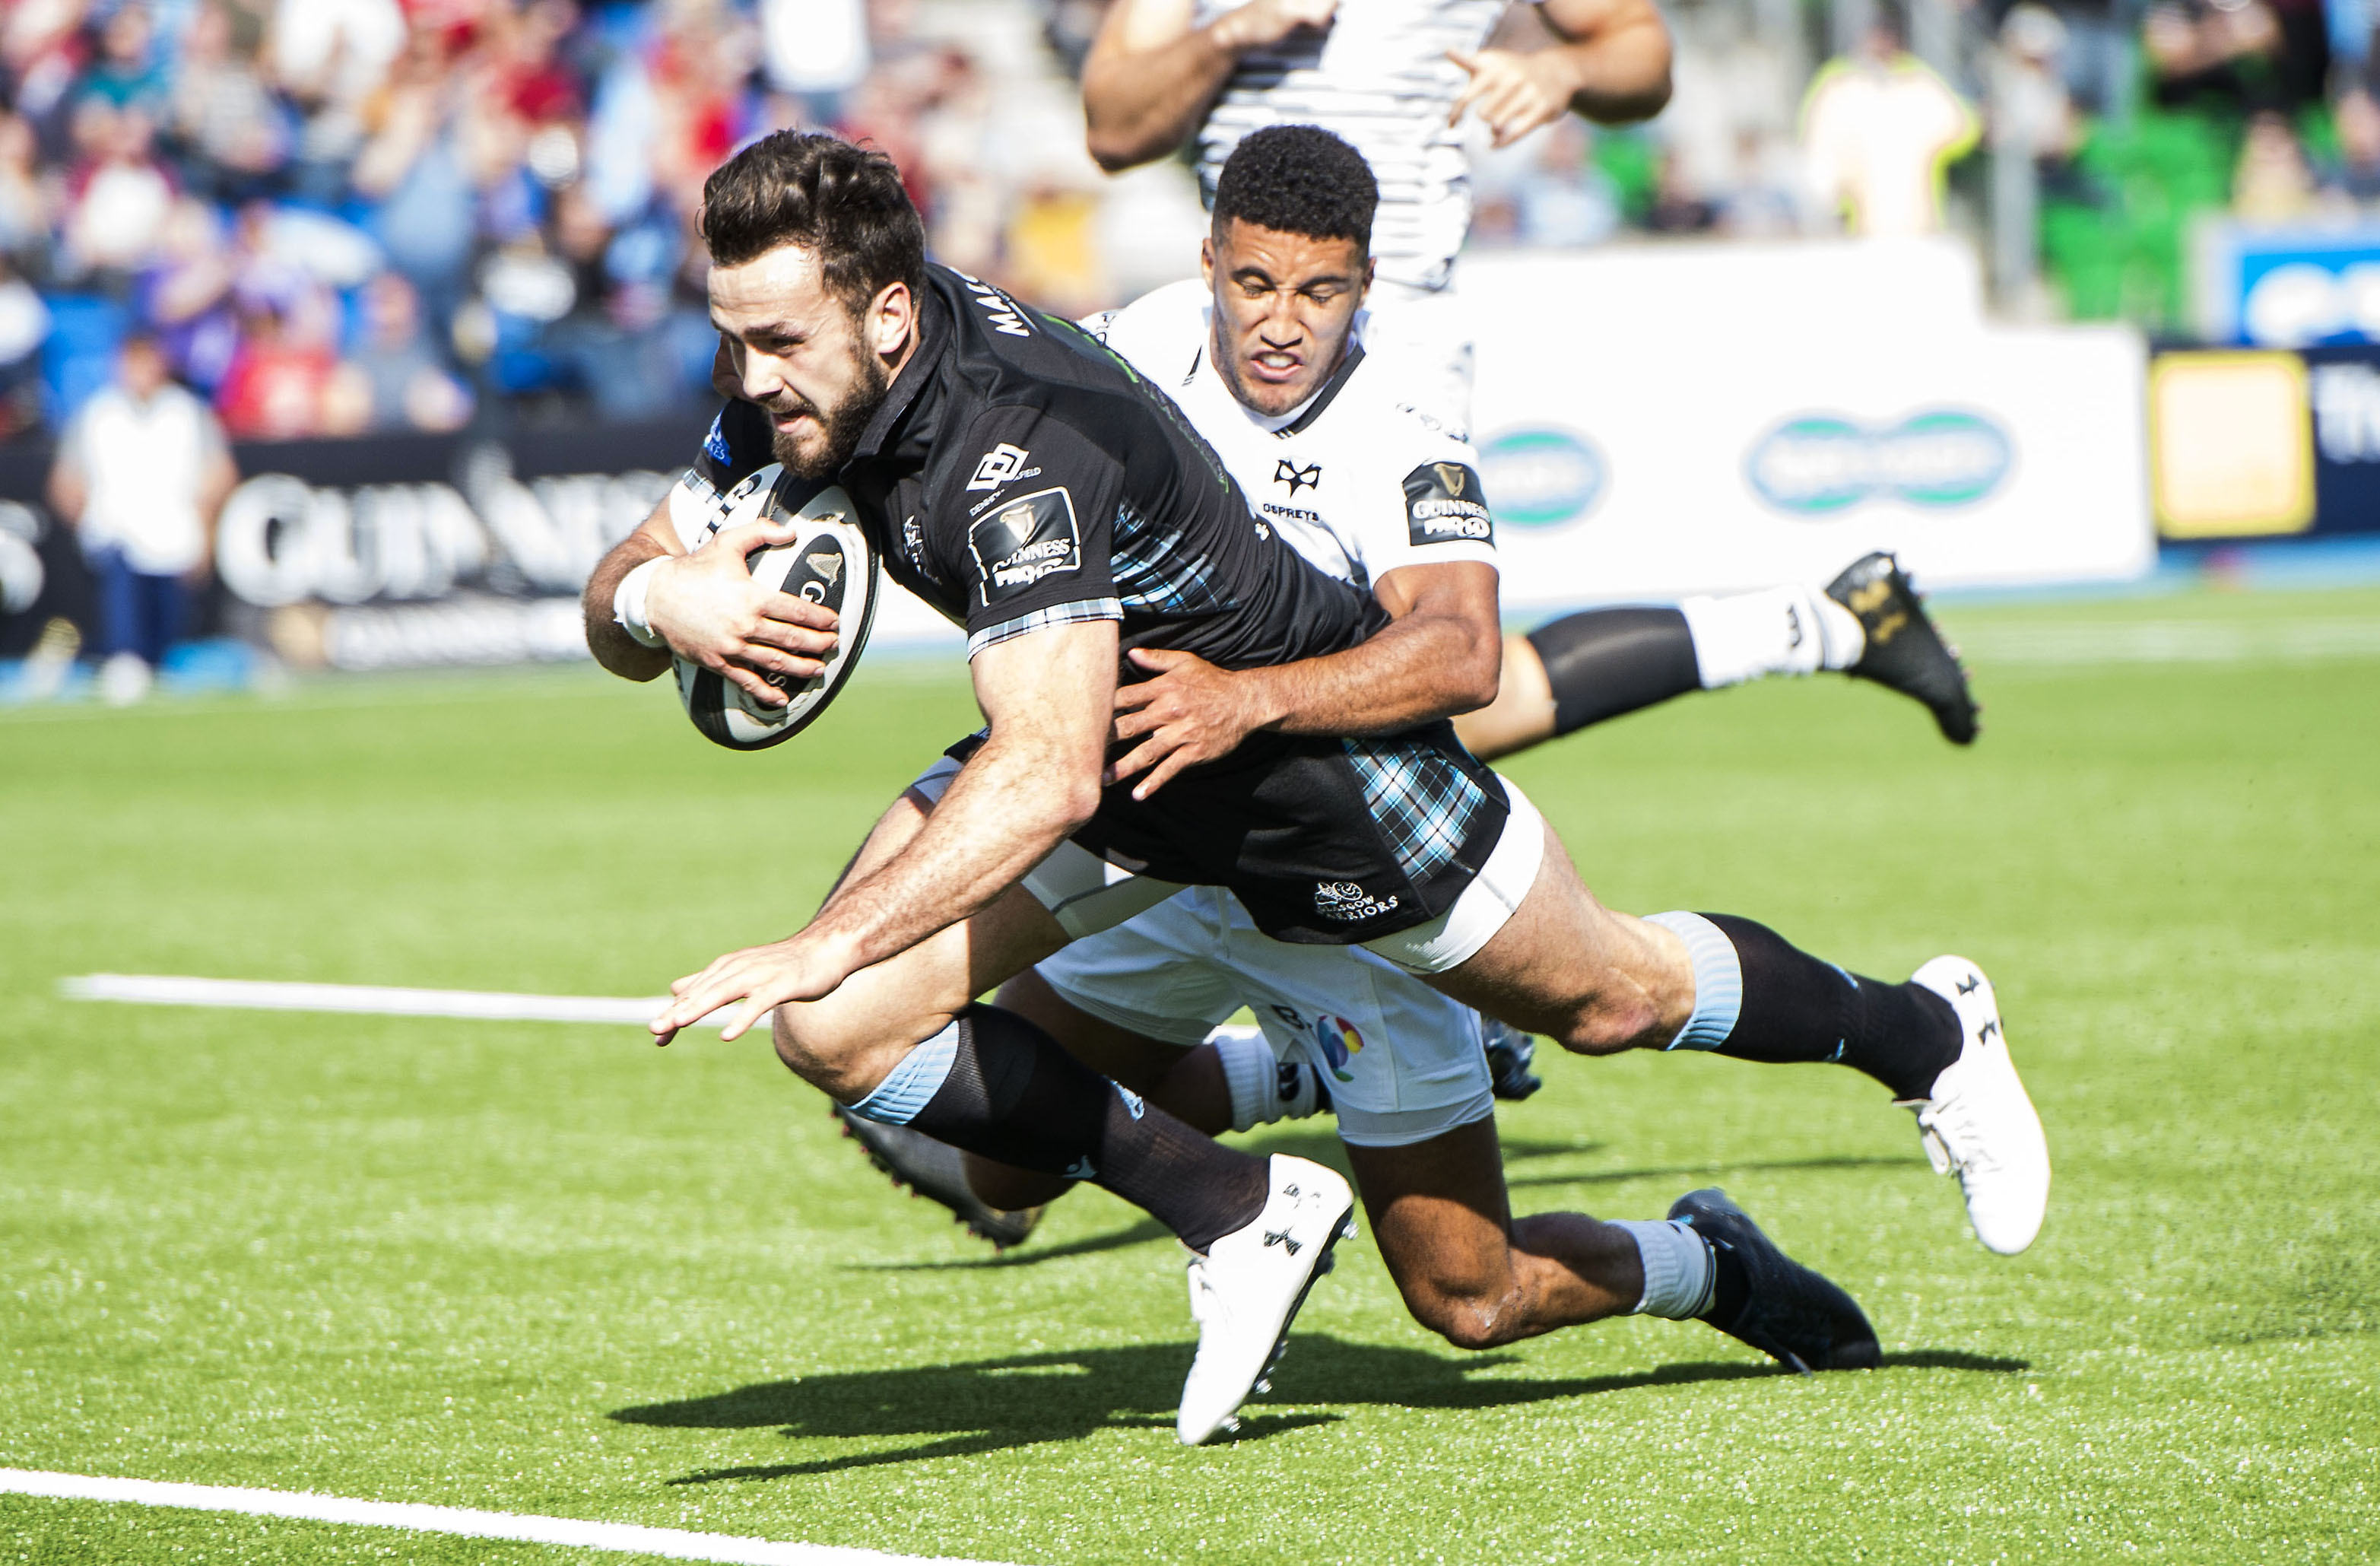 Alex Dunbar breaks through to score the opening try at Scotstoun.